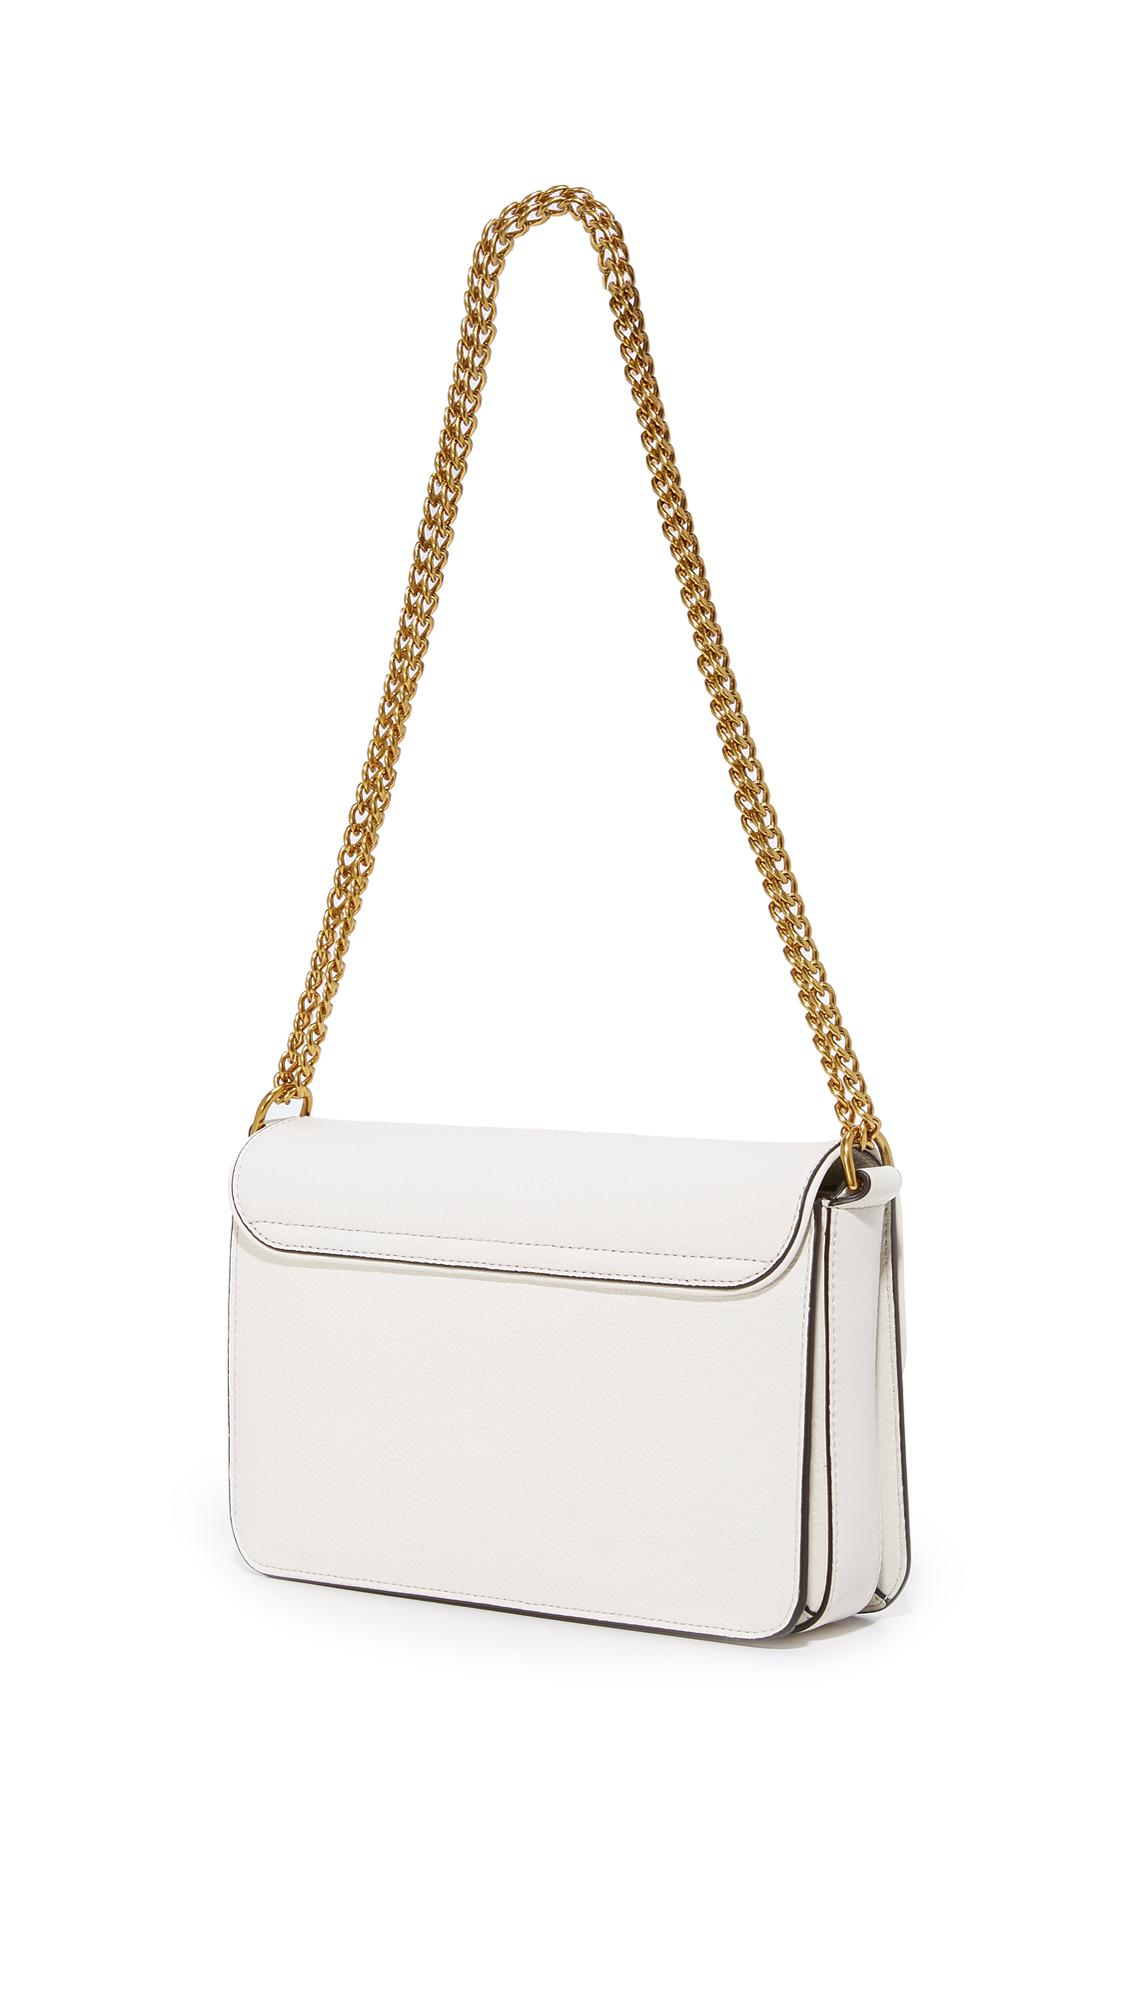 Tory Burch Leather Chelsea Convertible Shoulder Bag in Ivory 